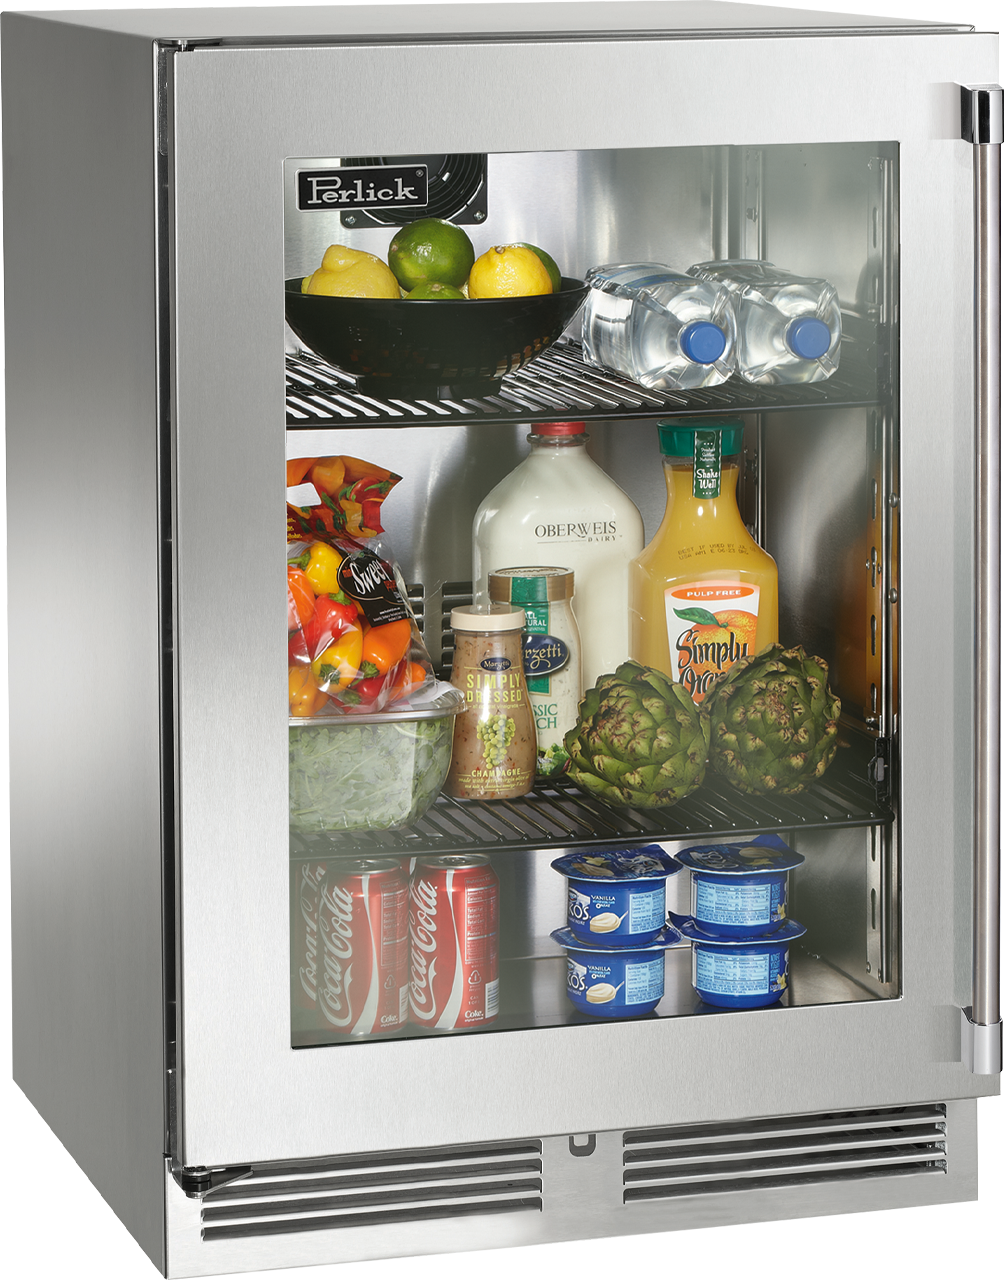 Perlick 24 Inch Signature 24 Built In Undercounter Counter Depth Compact All-Refrigerator HP24RS43L